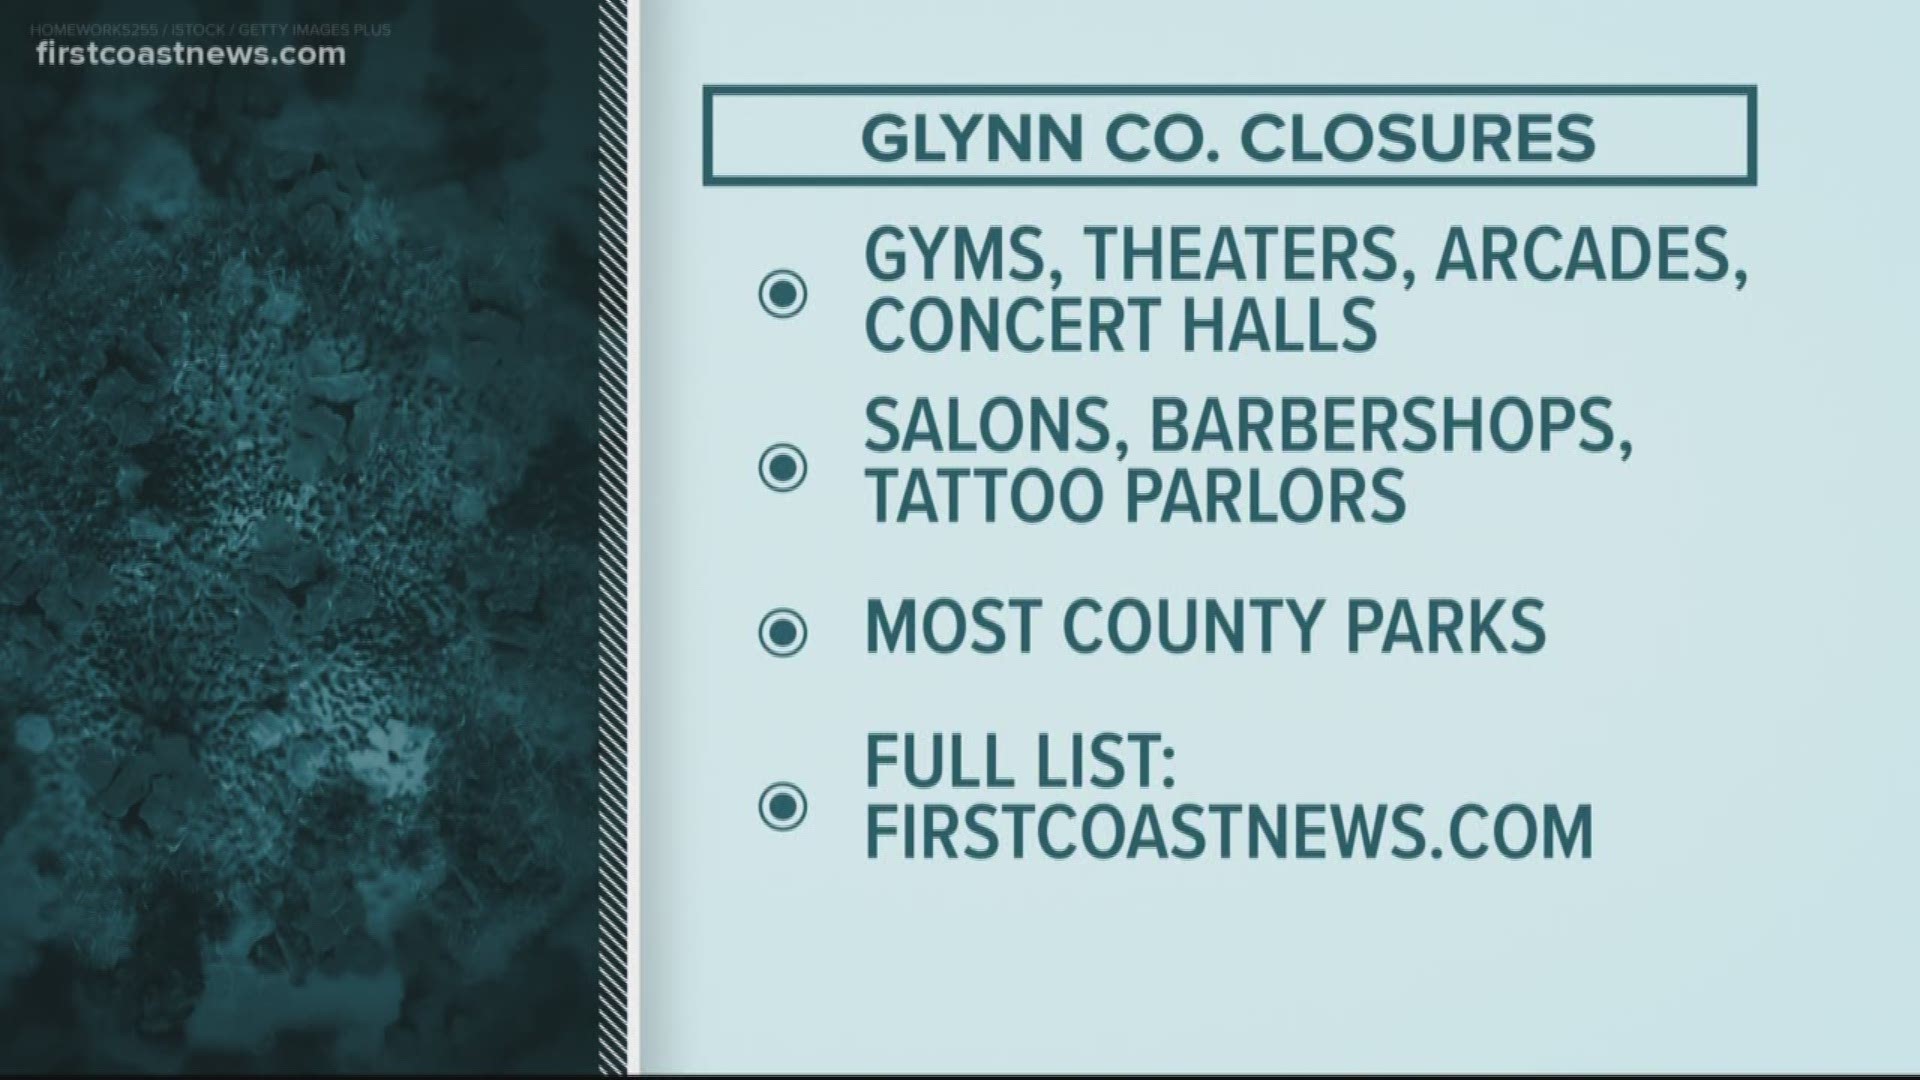 The Glynn County Board of Commissioners passed an Executive Order to close all non-essential business.